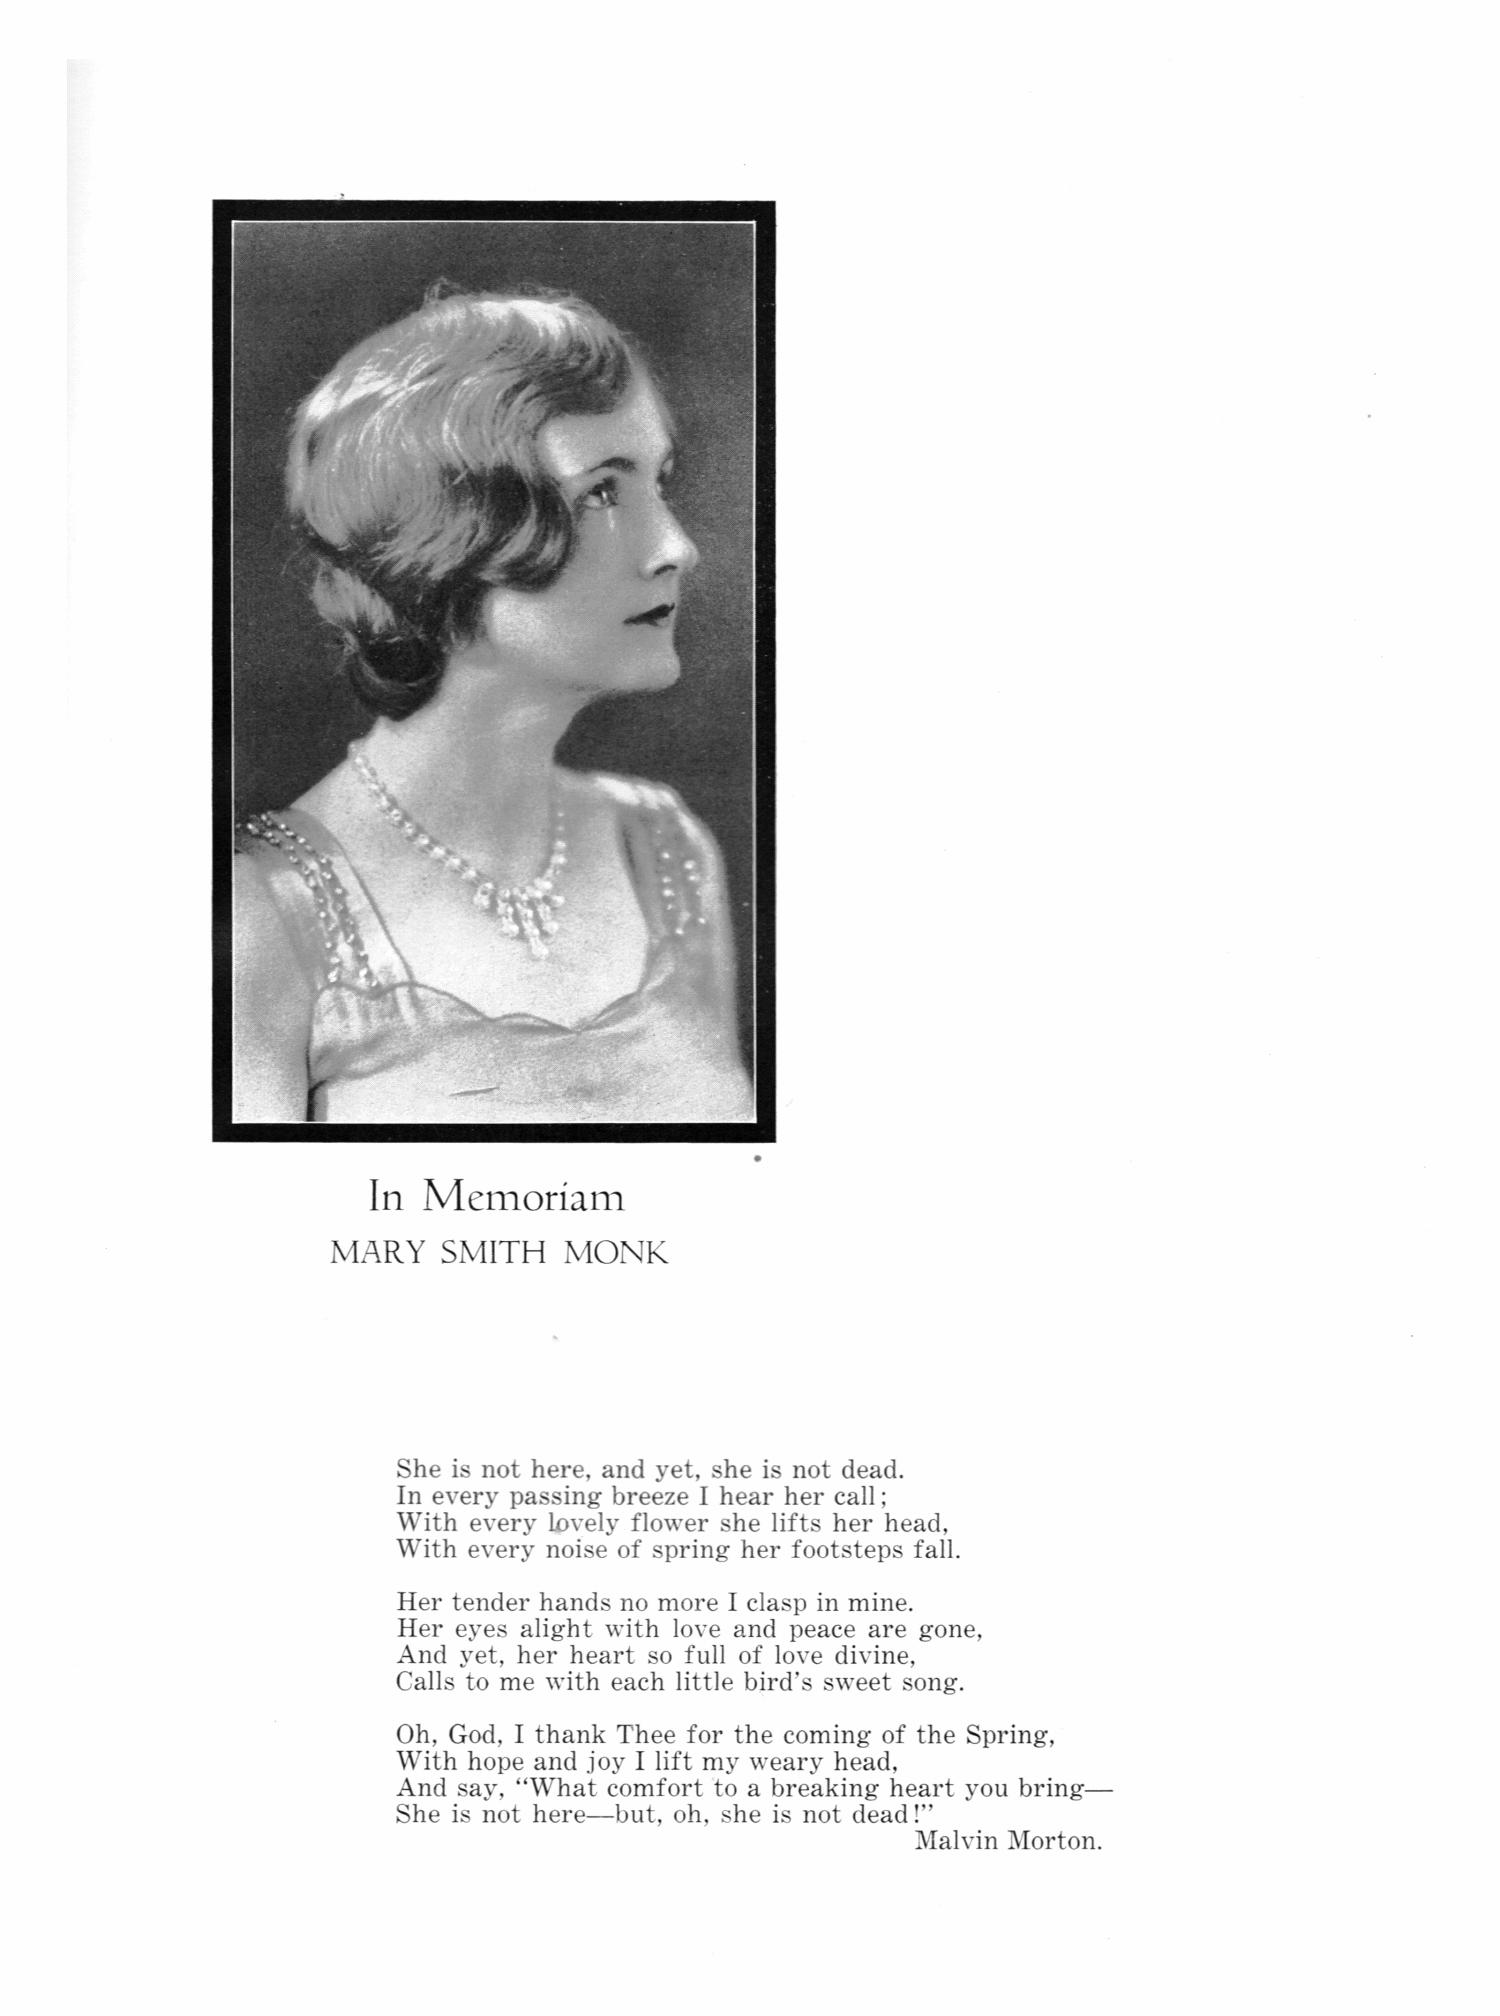 TXWOCO, Yearbook of Texas Woman's College, 1931
                                                
                                                    45
                                                